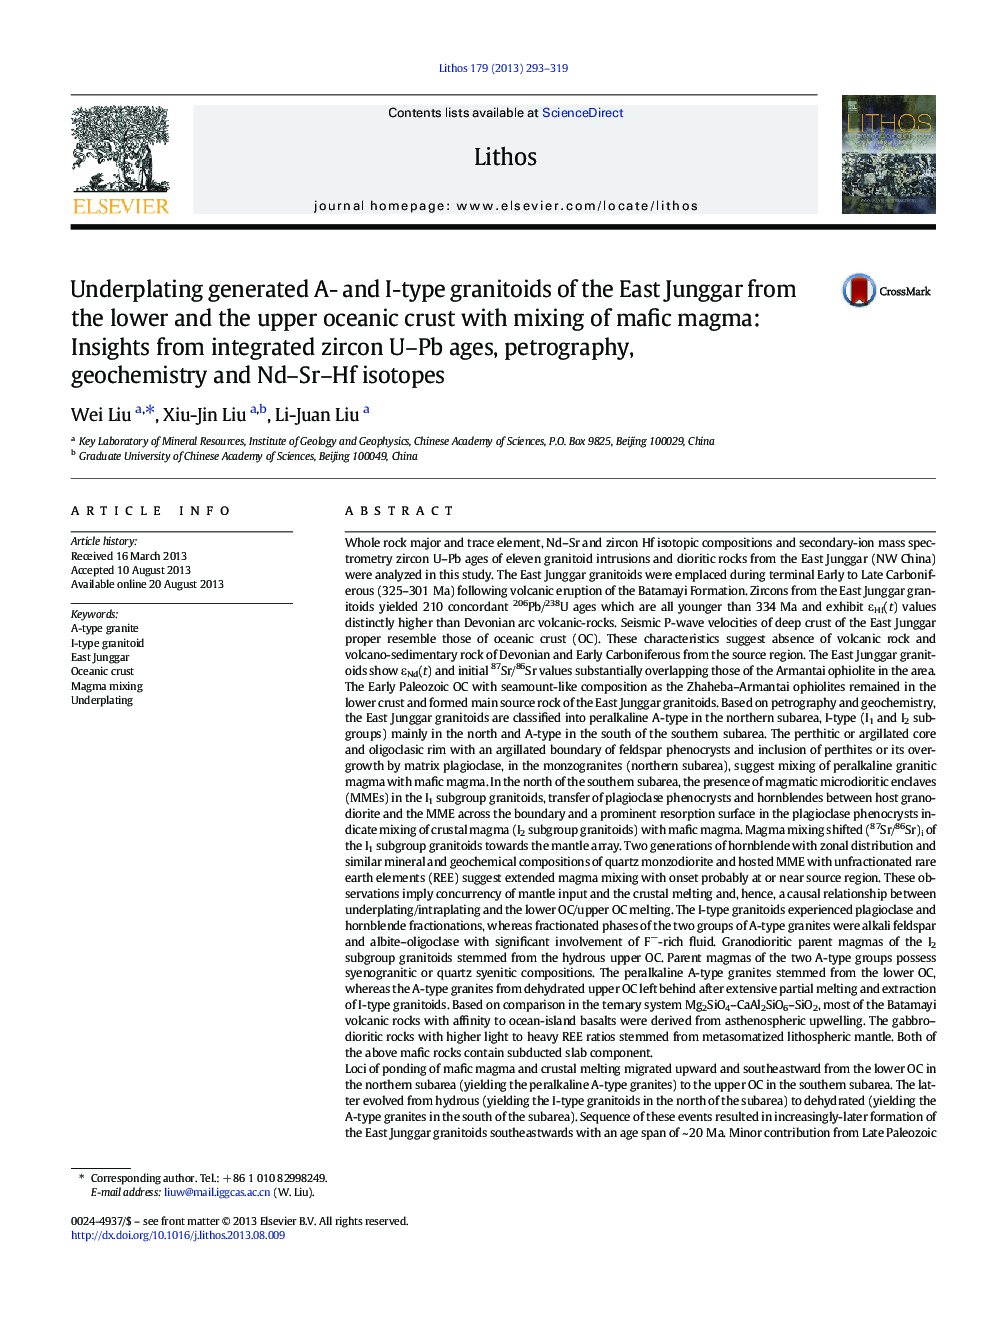 Underplating generated A- and I-type granitoids of the East Junggar from the lower and the upper oceanic crust with mixing of mafic magma: Insights from integrated zircon U–Pb ages, petrography, geochemistry and Nd–Sr–Hf isotopes